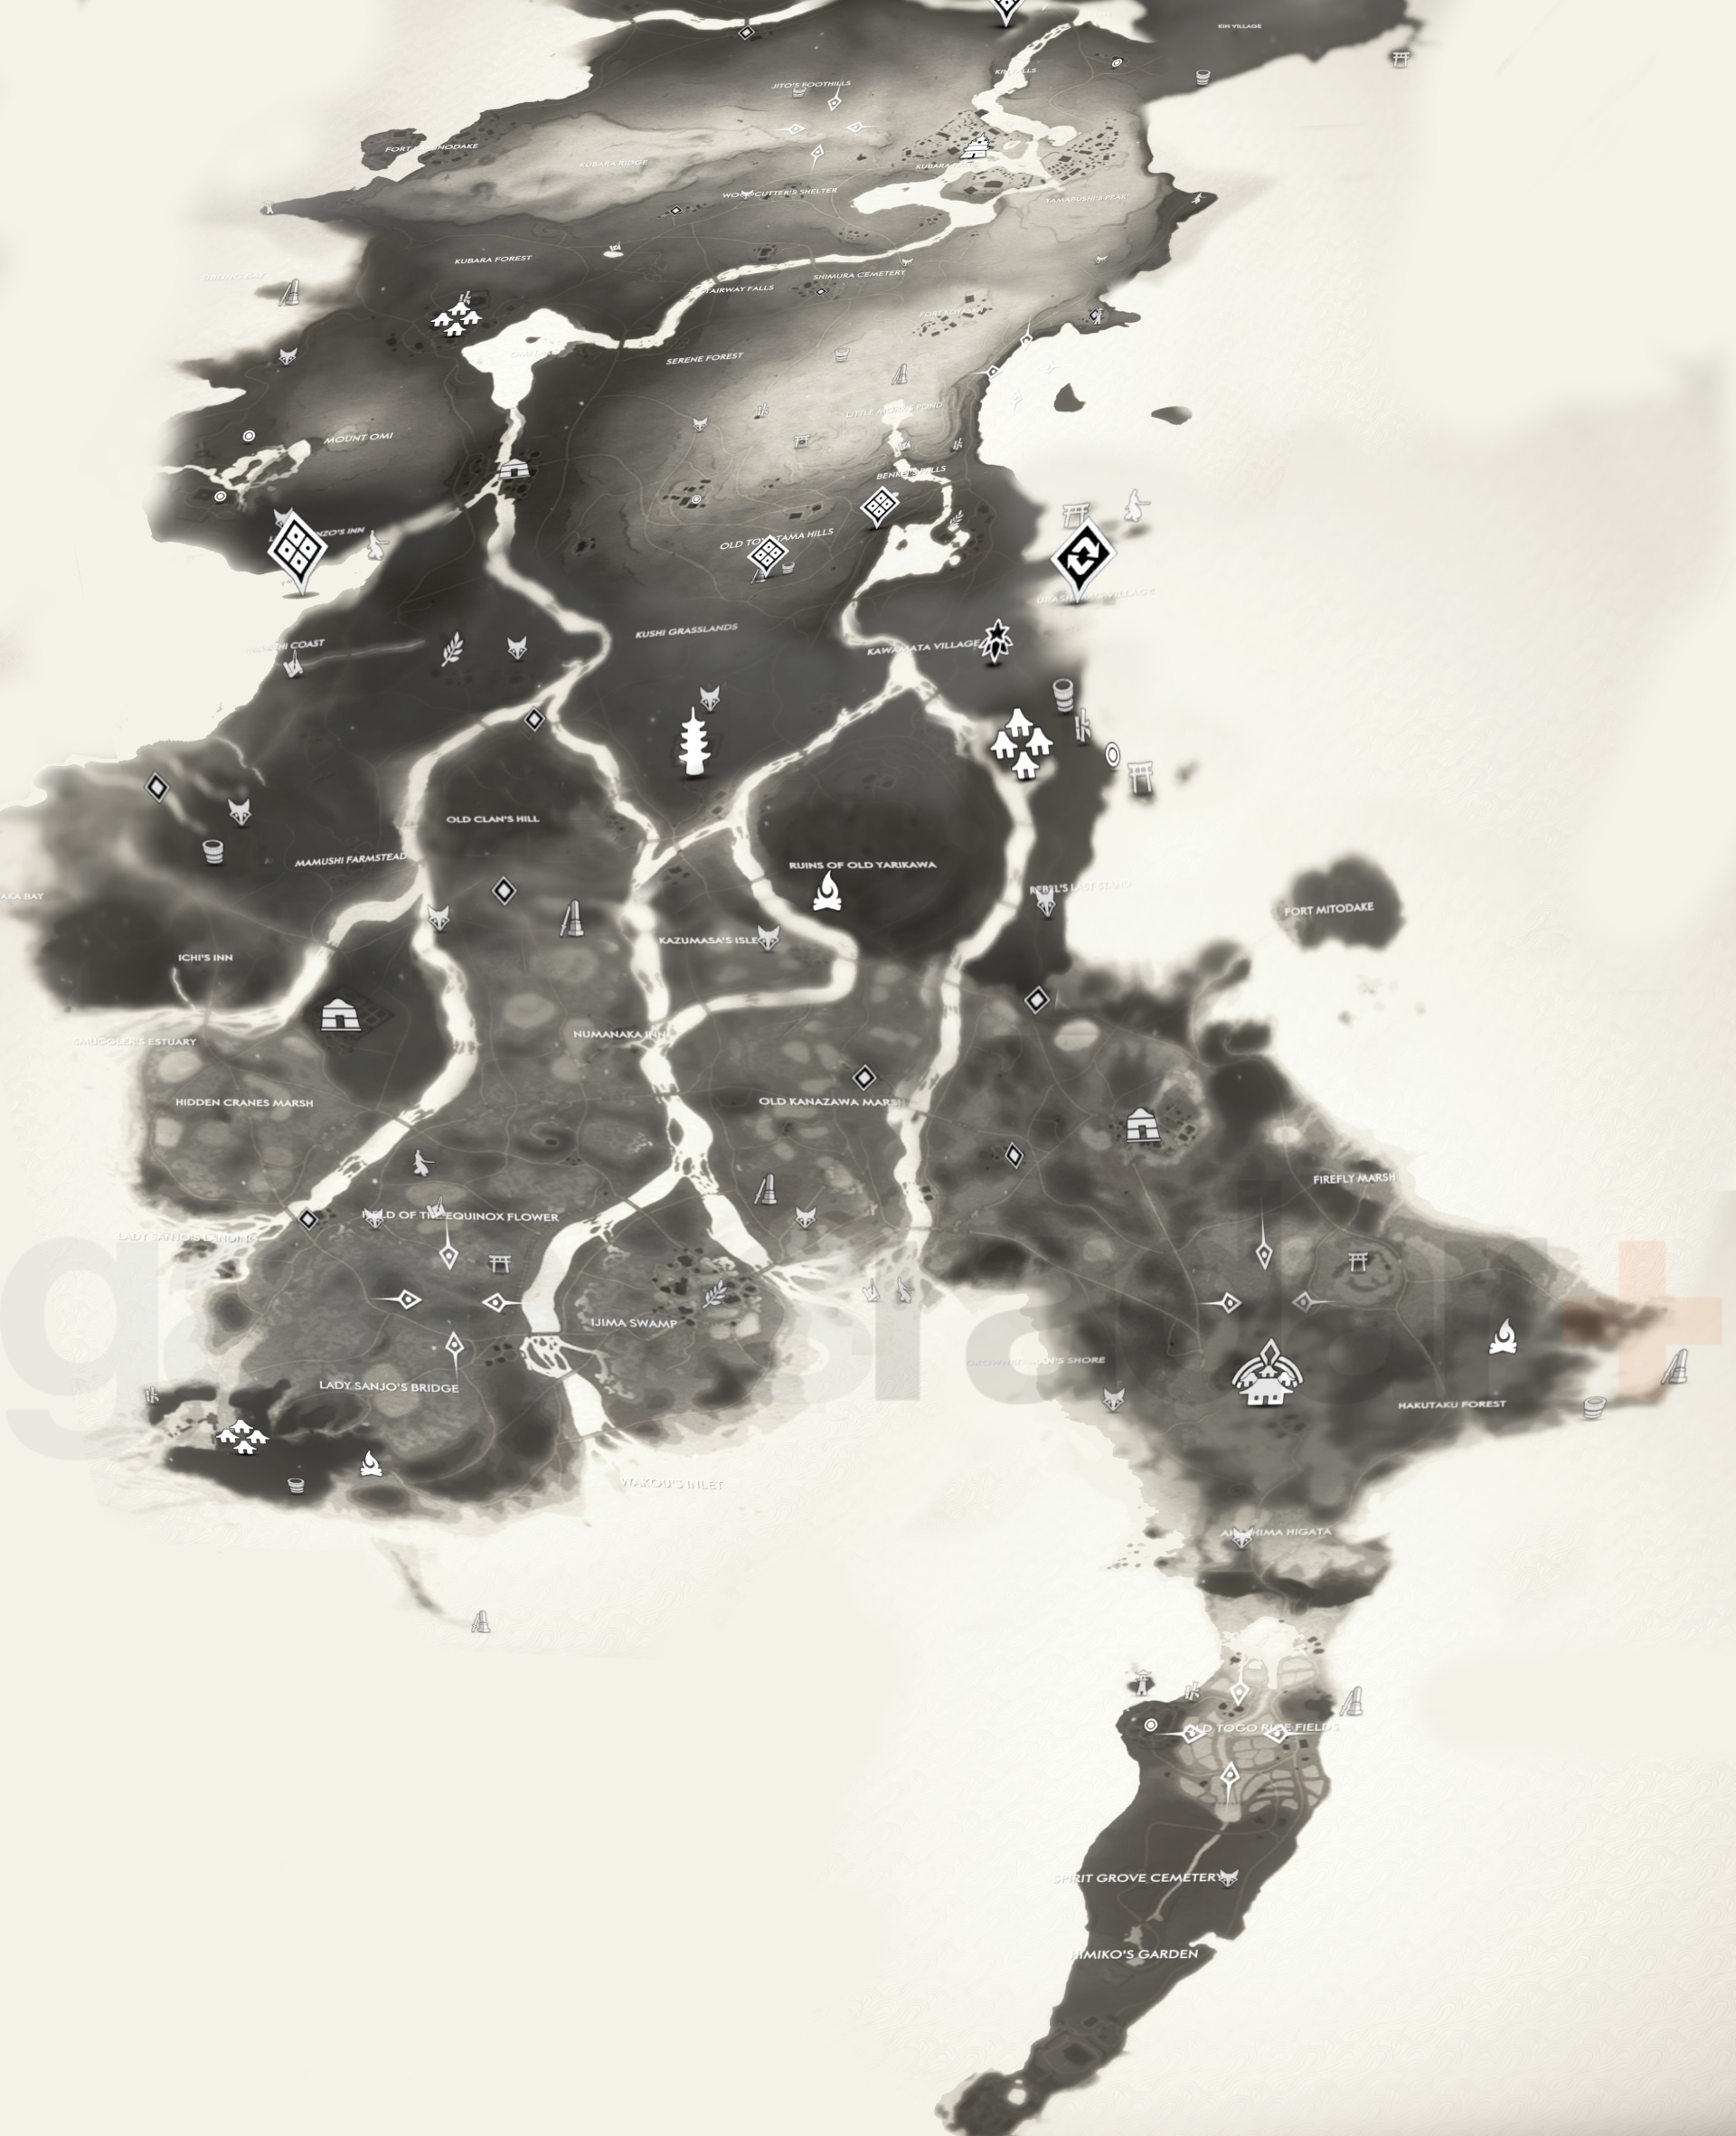 ghost of tsushima map reveal